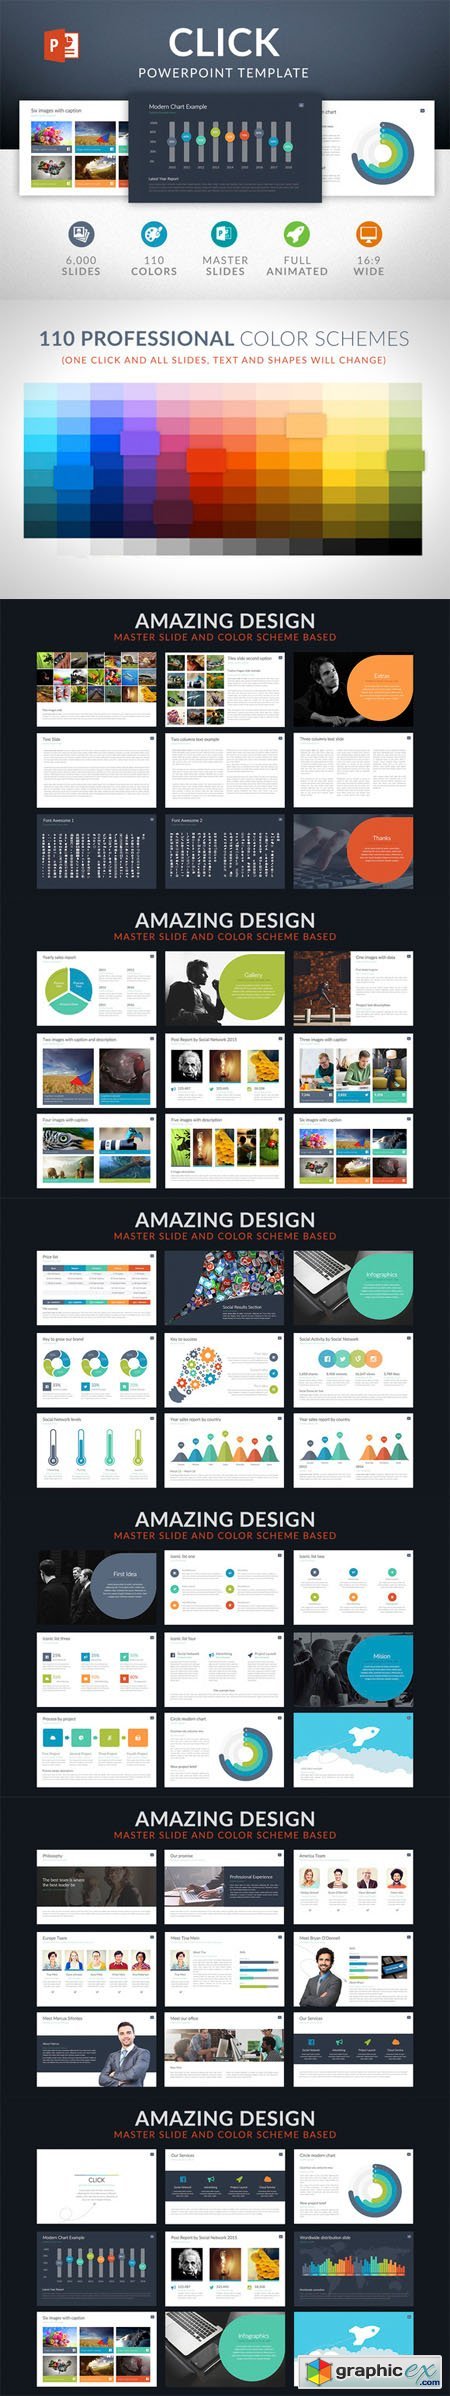 Click | Powerpoint Template